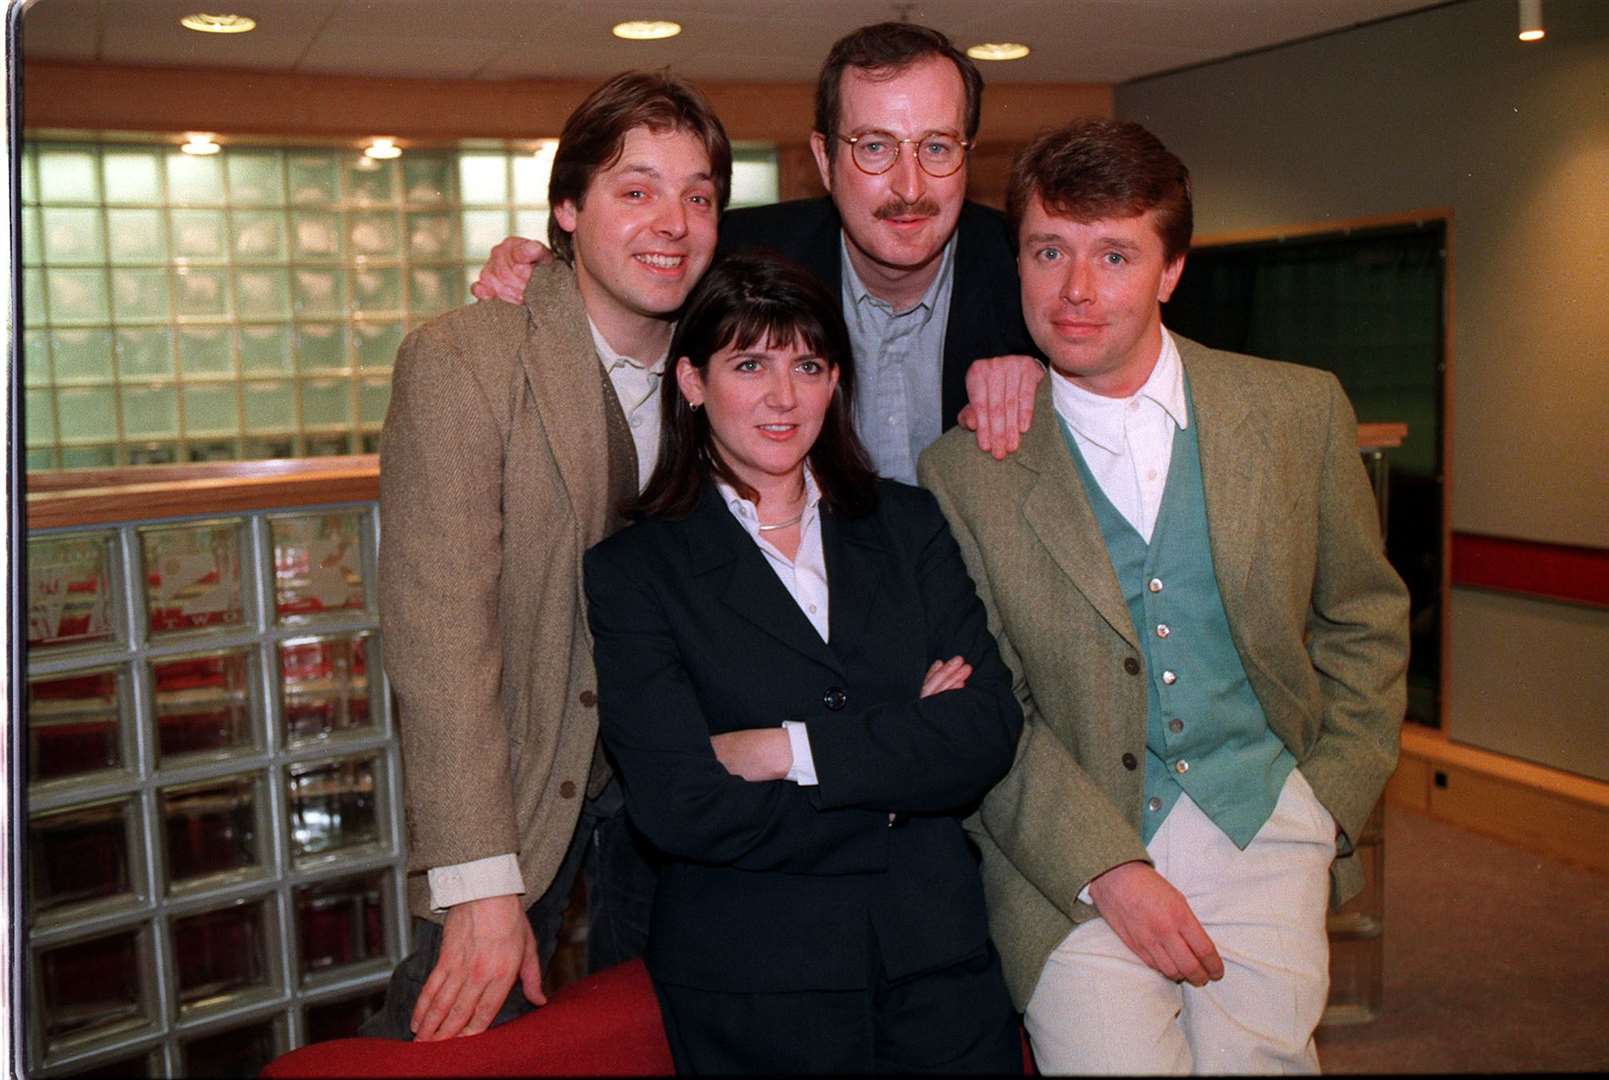 Mark Goodier, Emma Freud, Steve Wright and Nicky Campbell in 2002 (Fiona Hanson/PA)